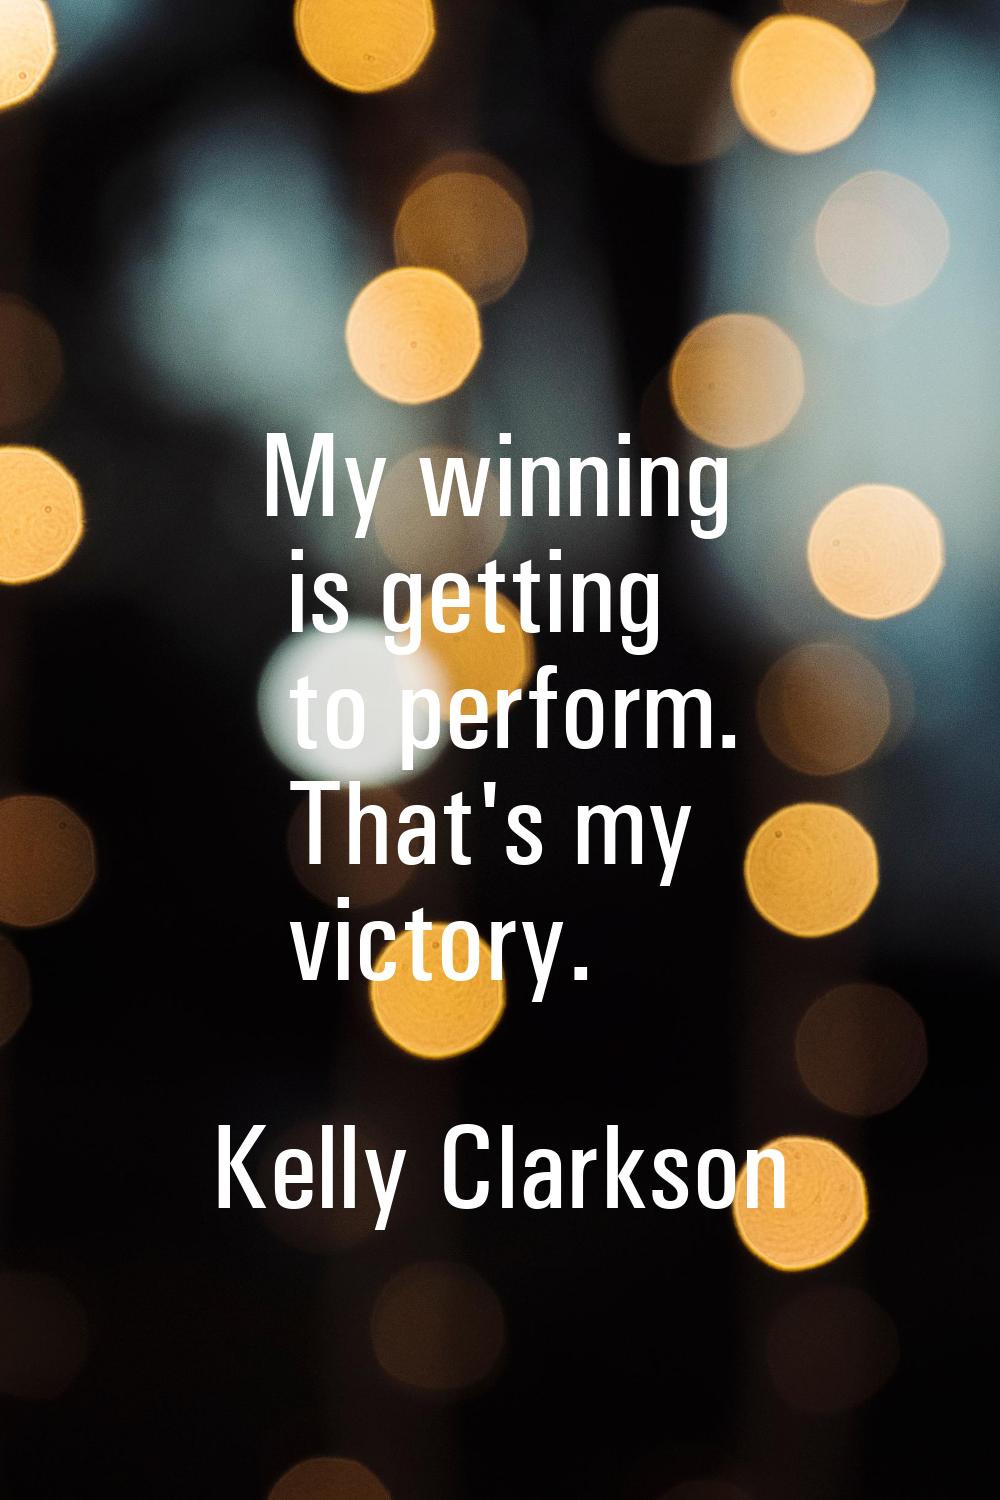 My winning is getting to perform. That's my victory.